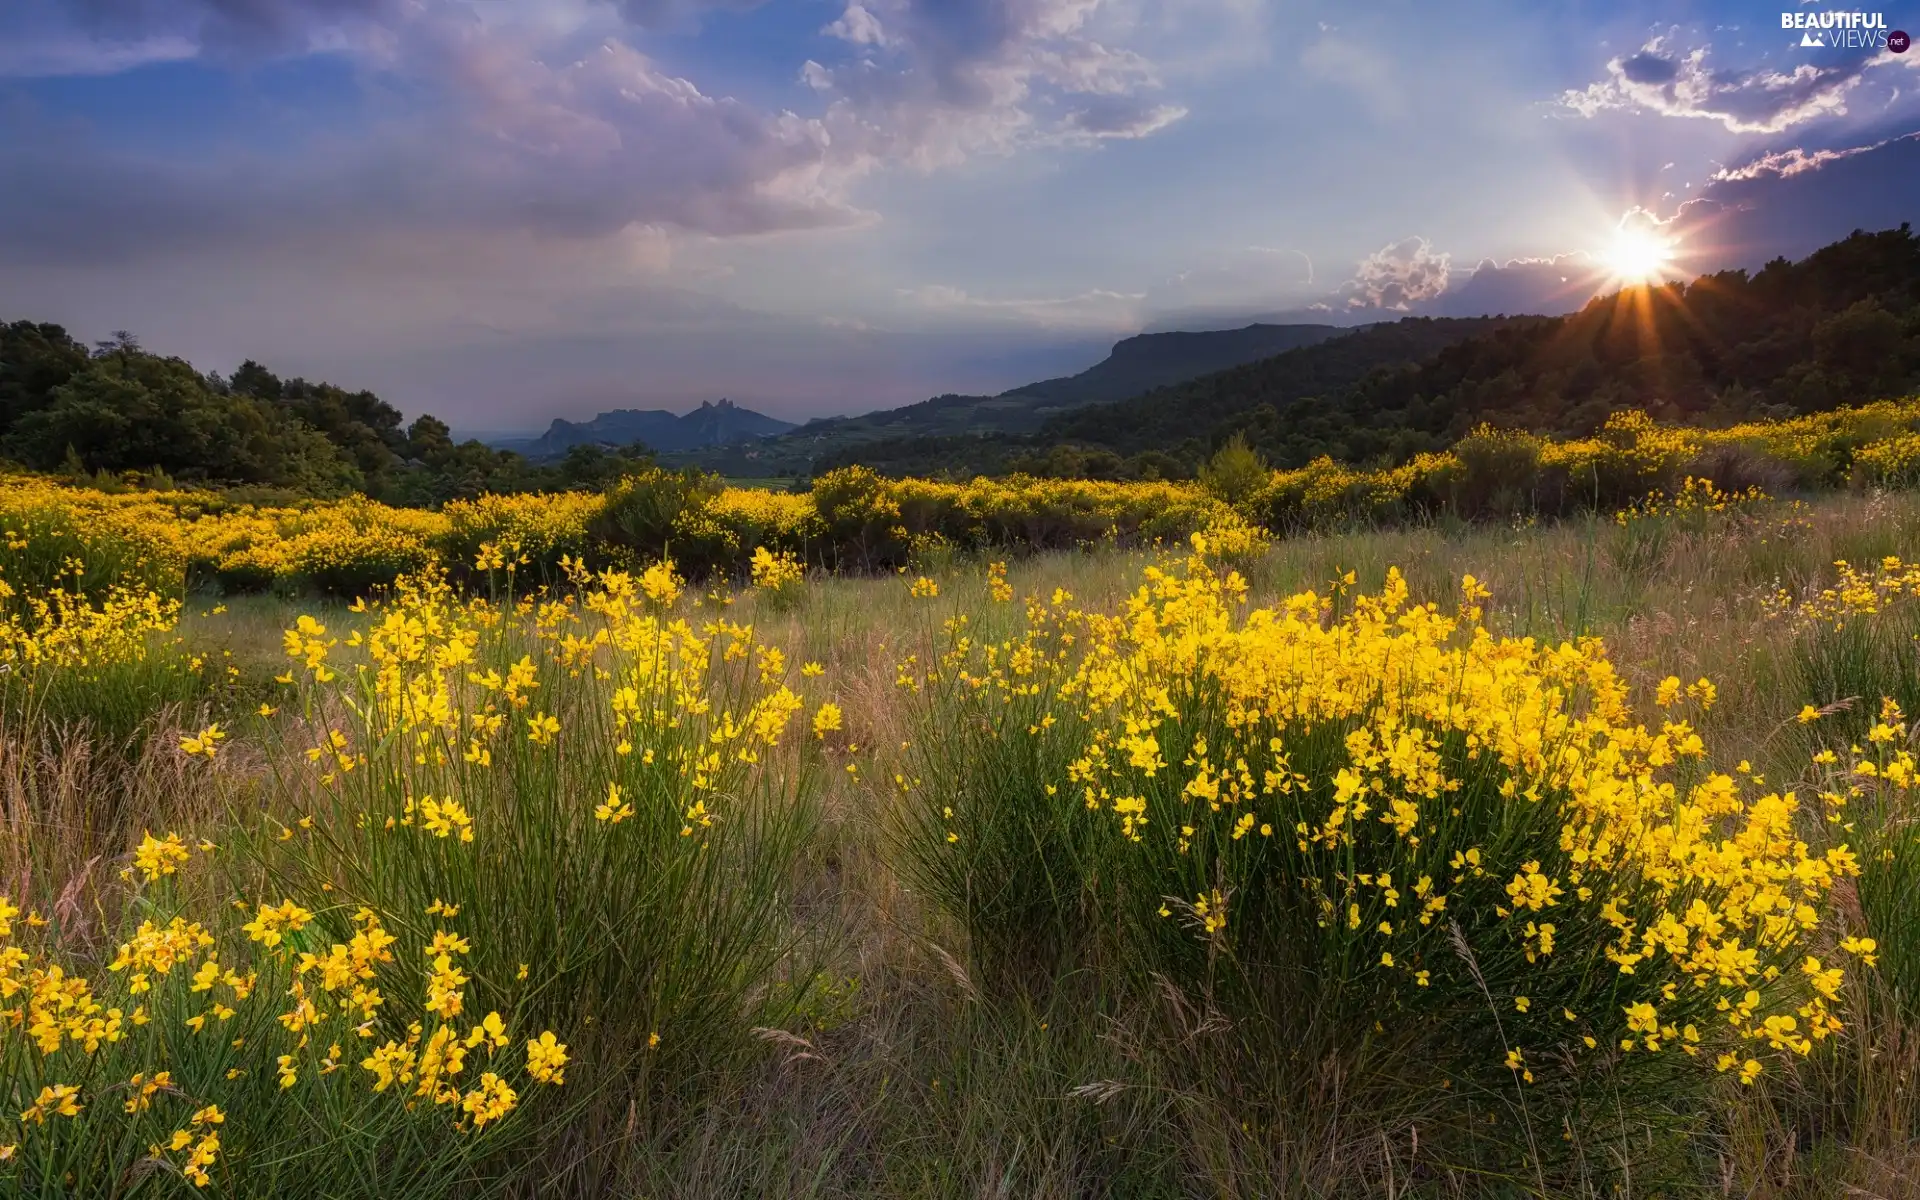 woods, Flowers, sun, Mountains, Meadow, rays, clouds